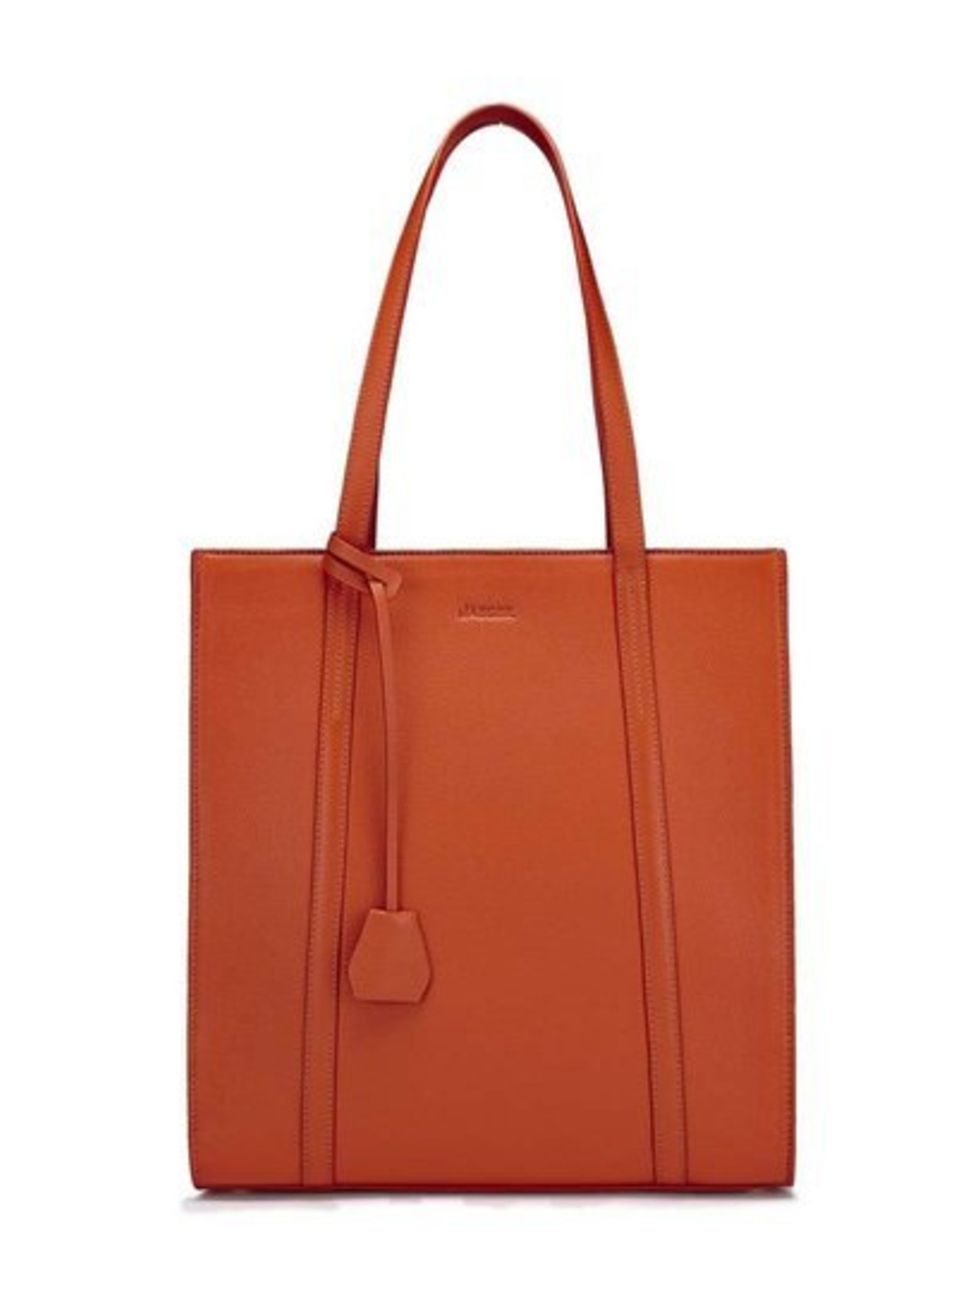 A simple, elegant work bag in an unexpected bright orange - perfect for Junior Sub-Editor Claire Sibbick.

Jaeger tote, £150